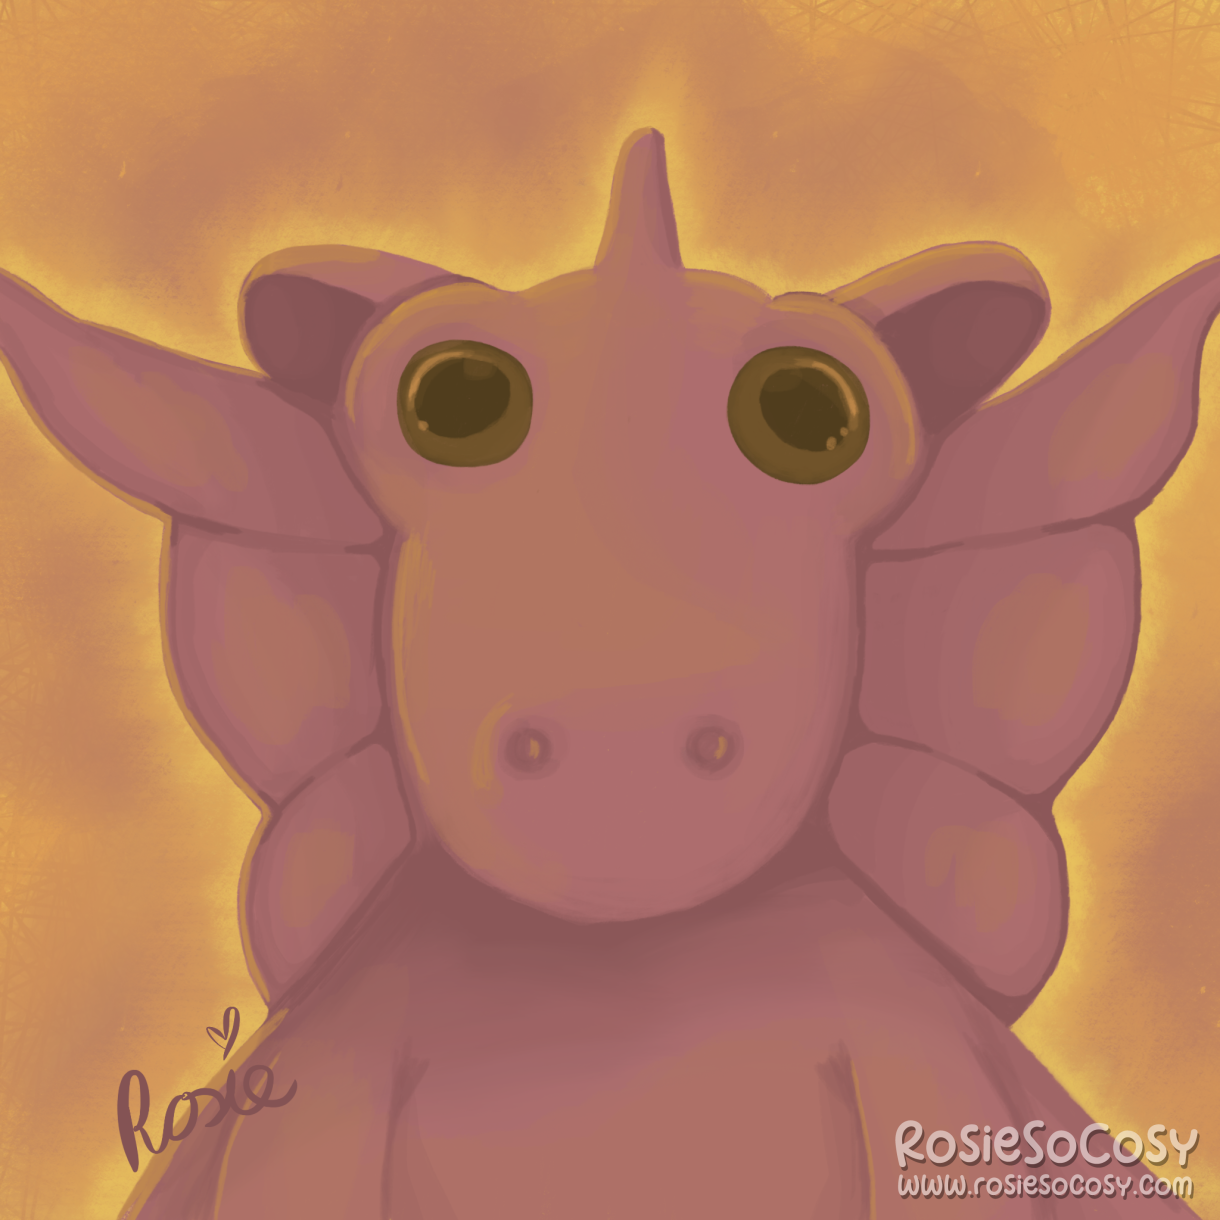 A drawing of a red dragon. The red is muted and has yellow/orange highlights/glow on its body. Inspired by the dragon Beanie Boos plushies.